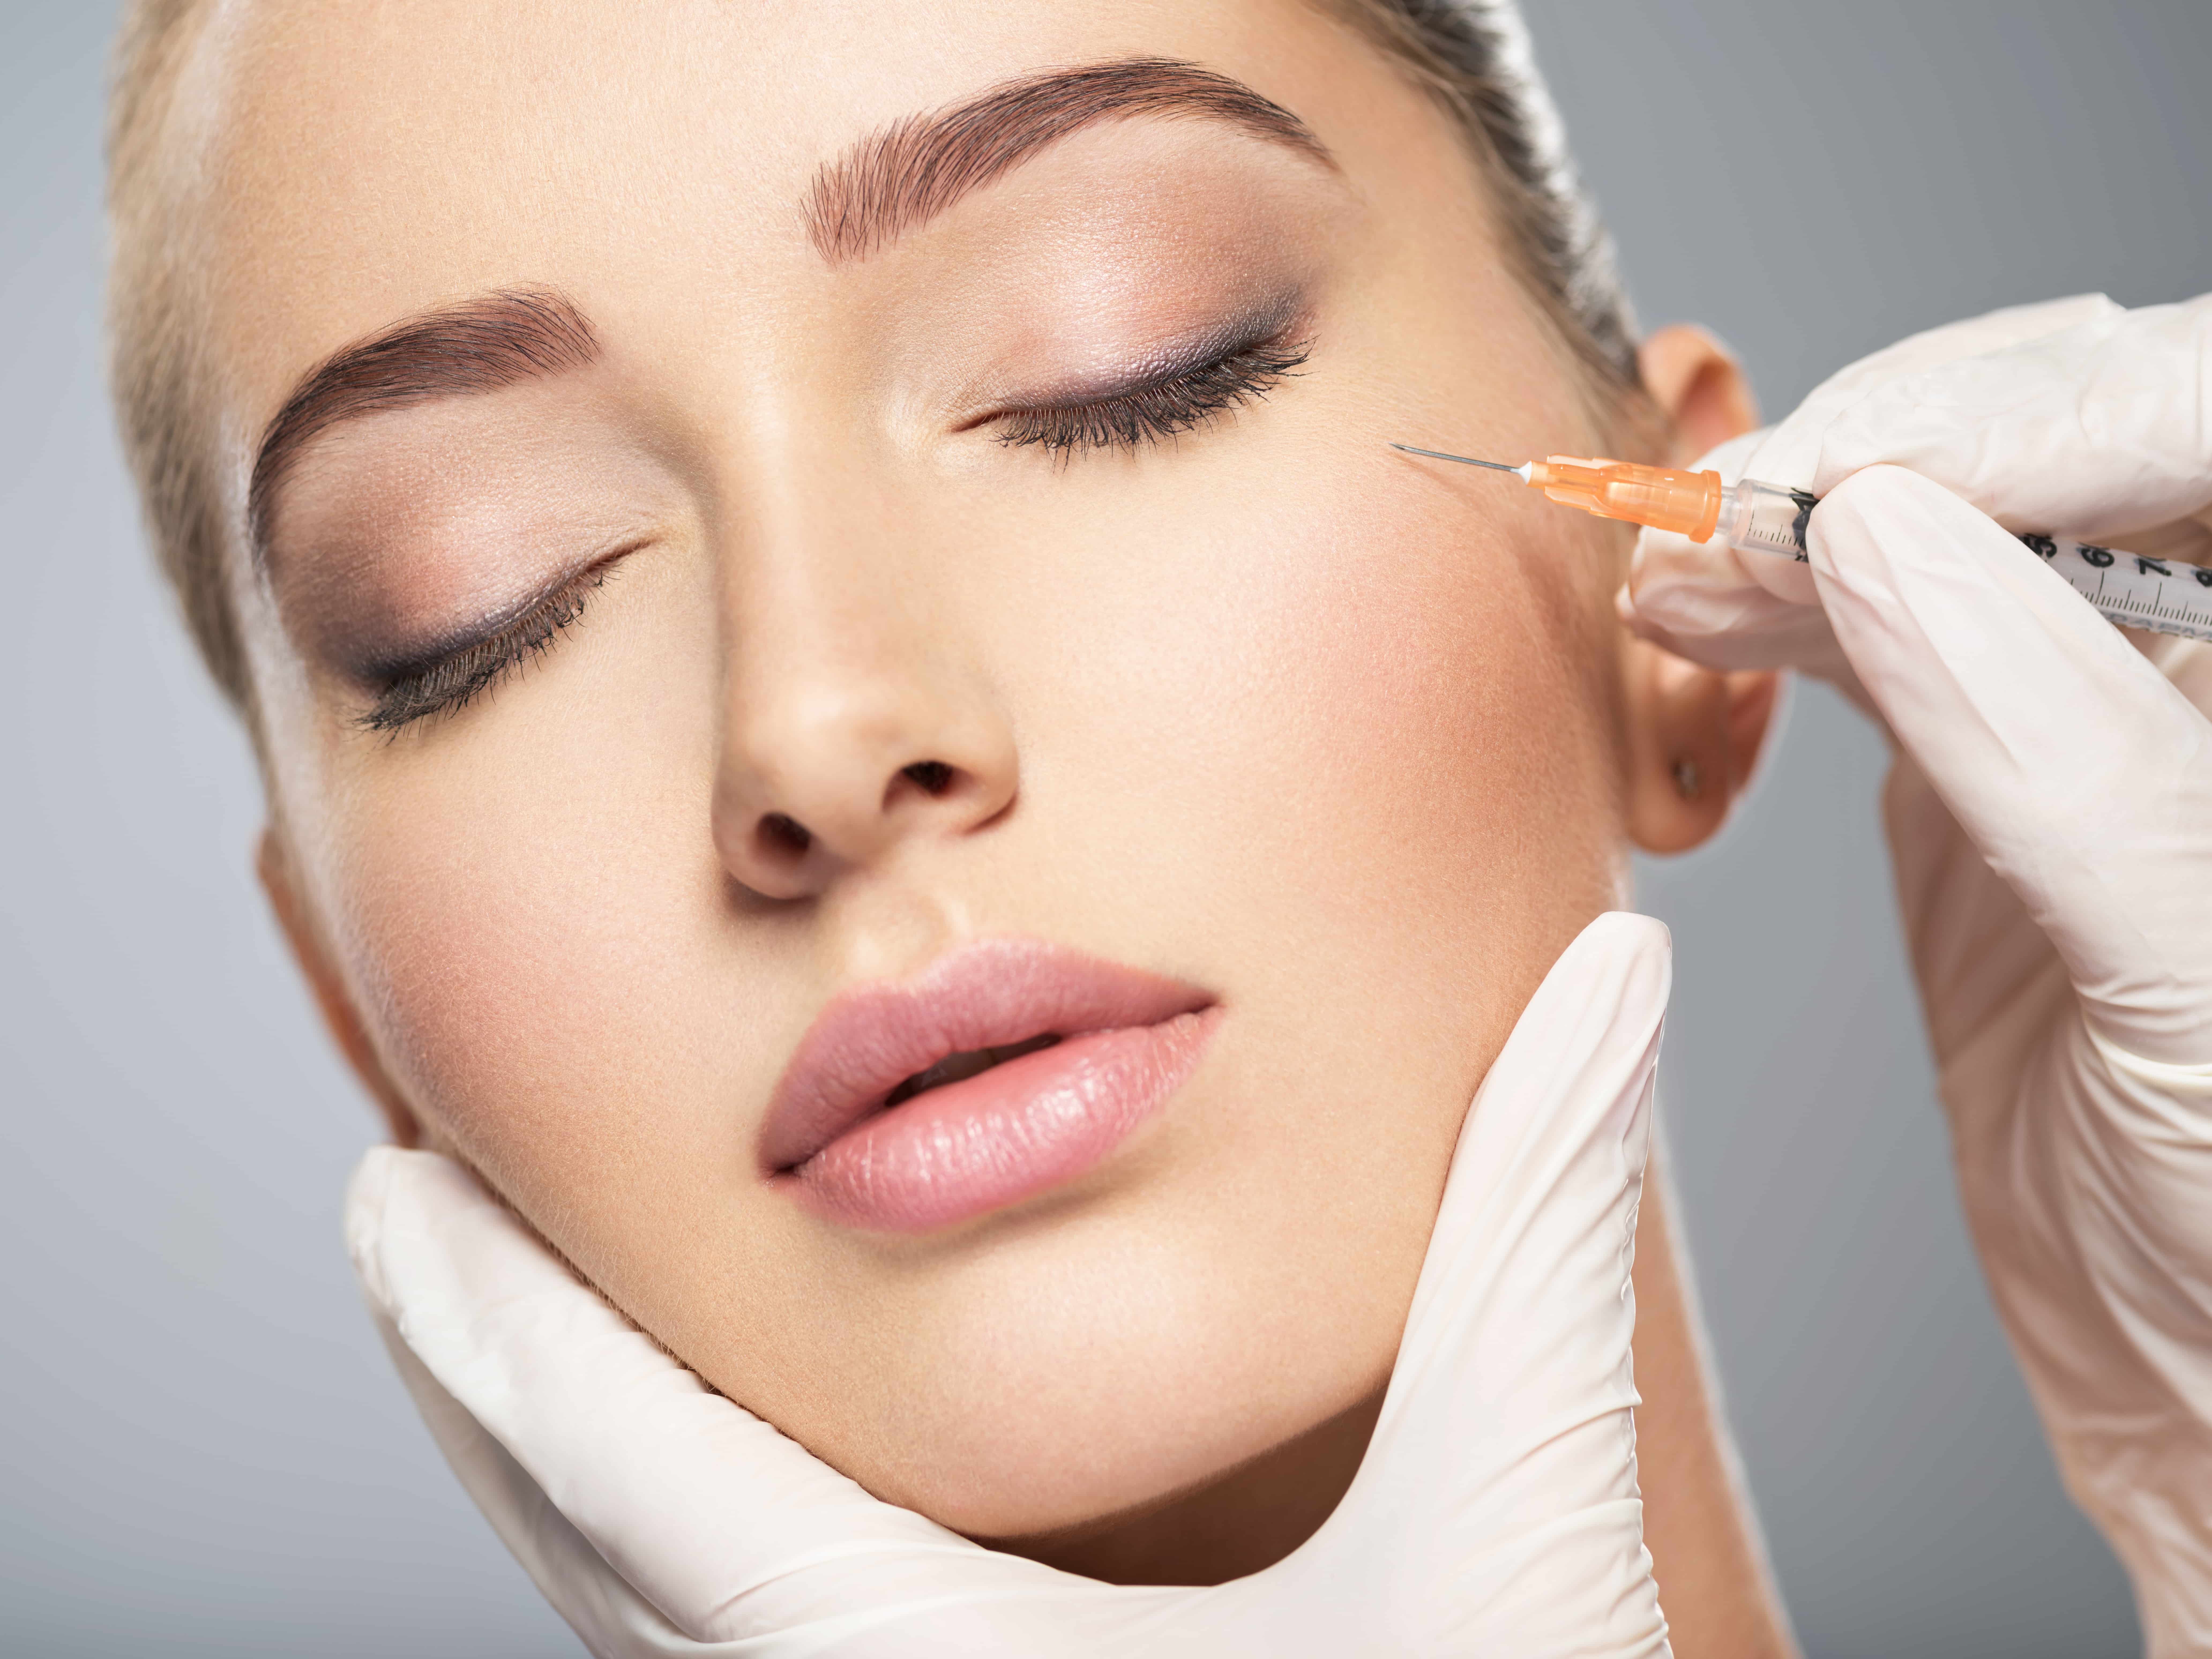 Botox Cosmetic and Medical uses, Procedures, and Side Effects